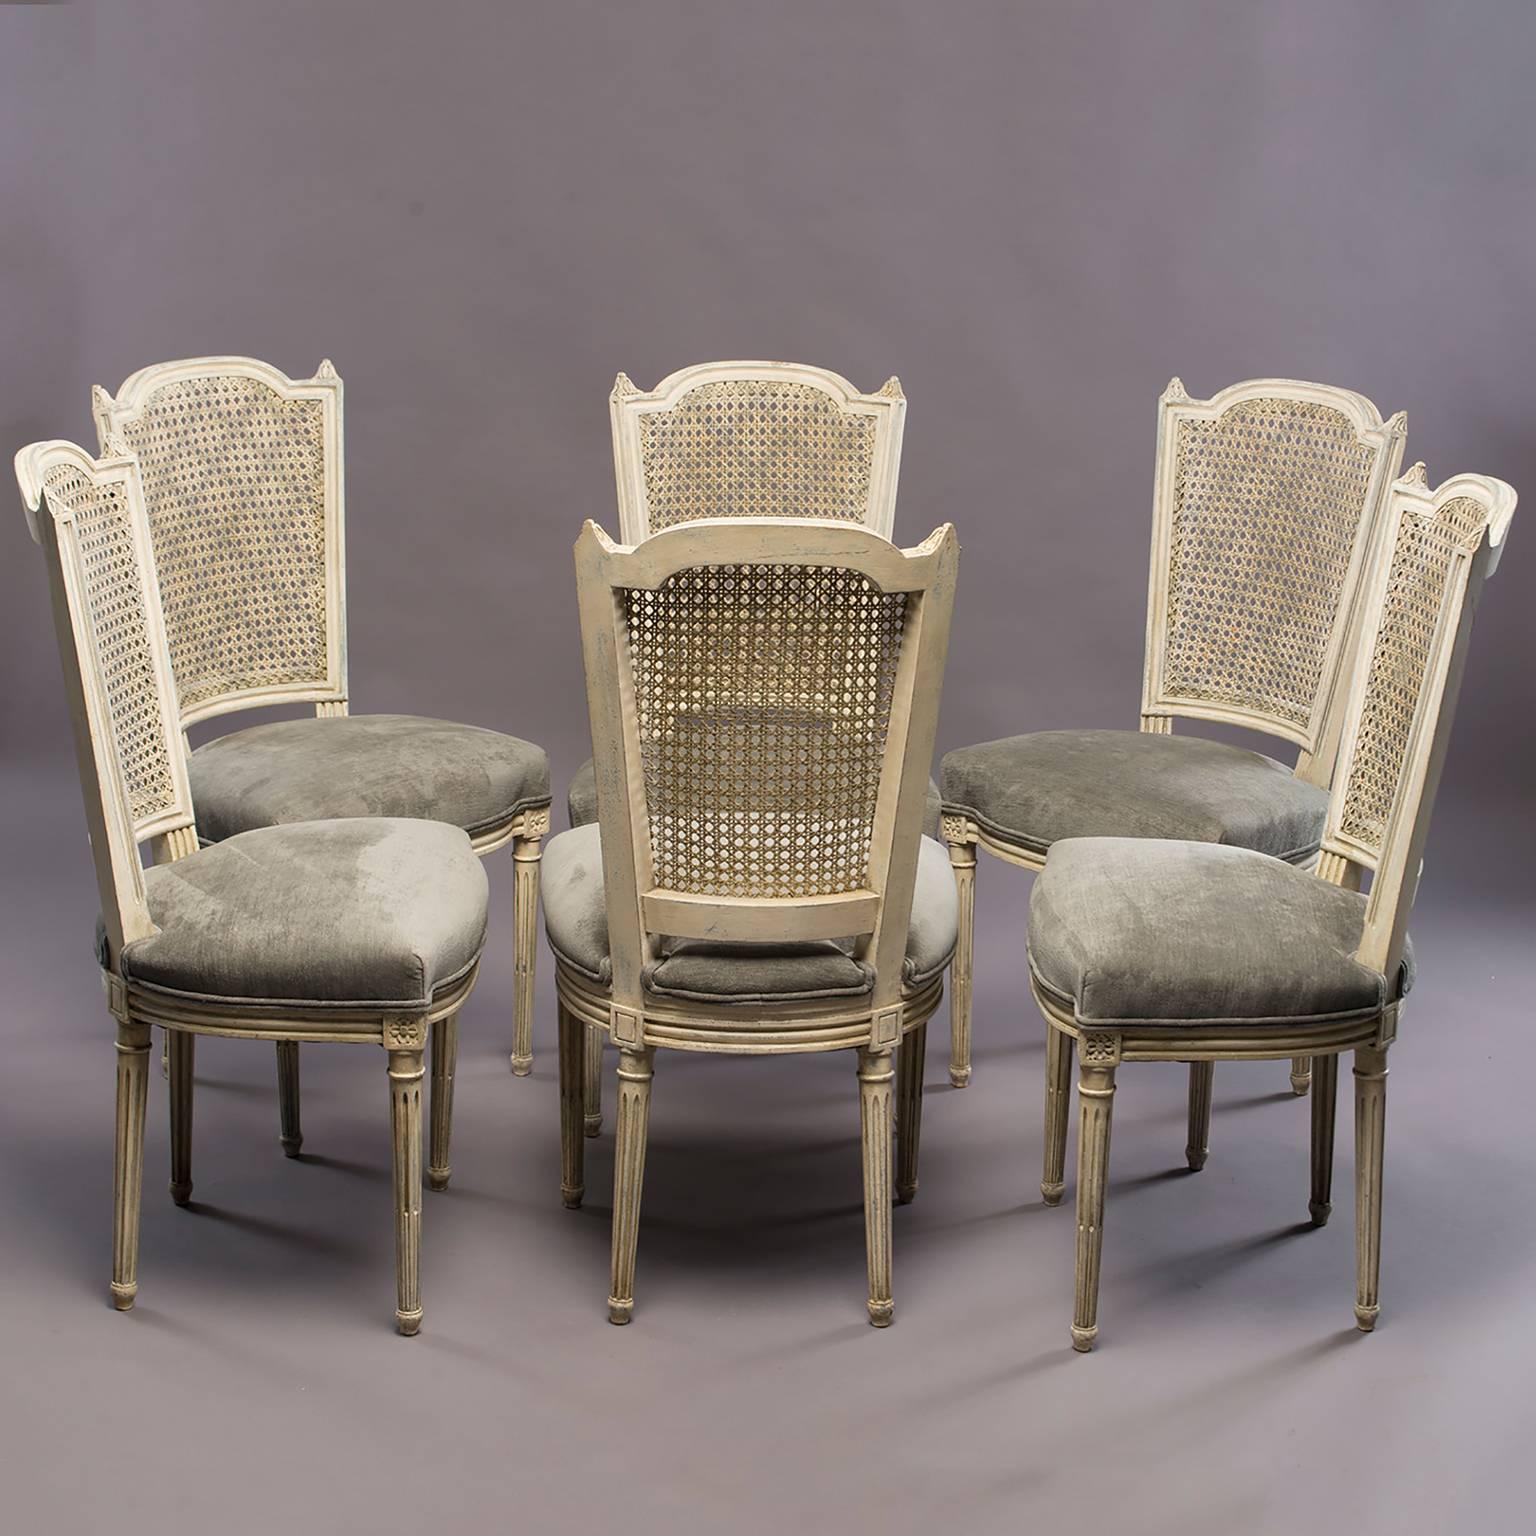 Set of six French dining chairs, circa 1940s. Antique white painted frames, classic reeded legs topped with a carved decorative medallion, and caned backs feature a subtle painted lattice design in gray. Seats are newly upholstered in coordinating